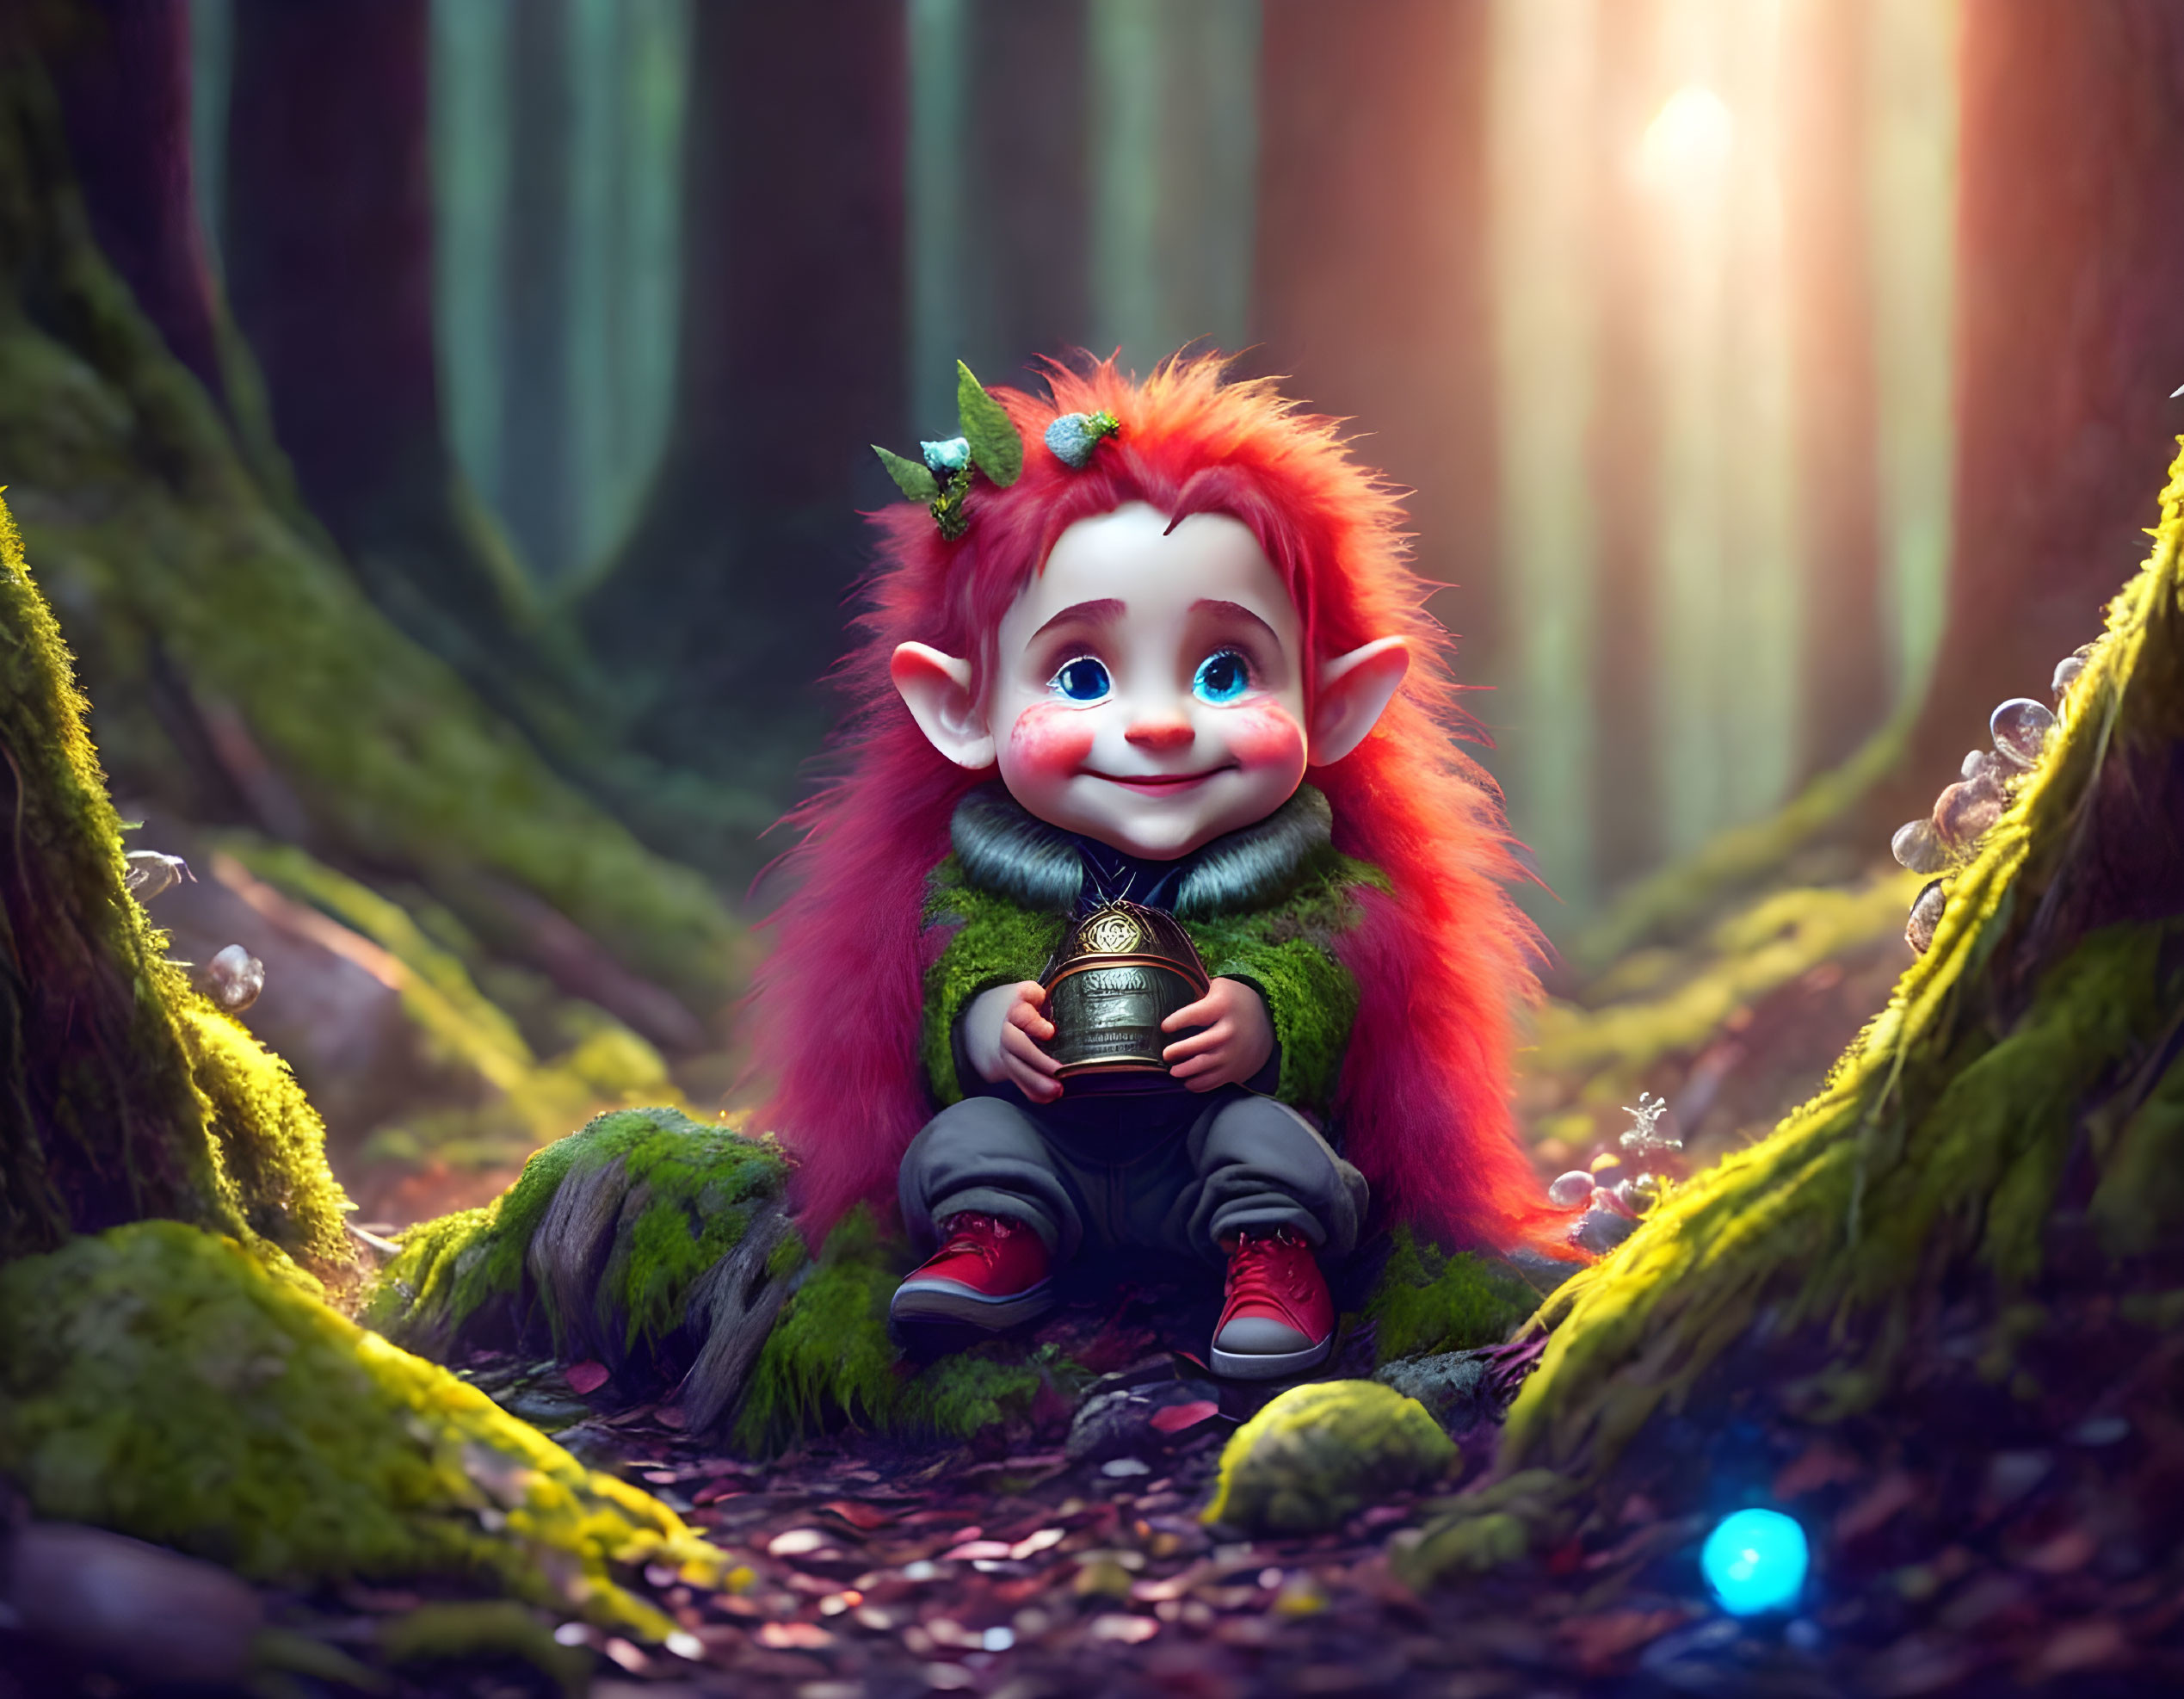 Red-Haired Animated Character in Mystical Forest with Pot